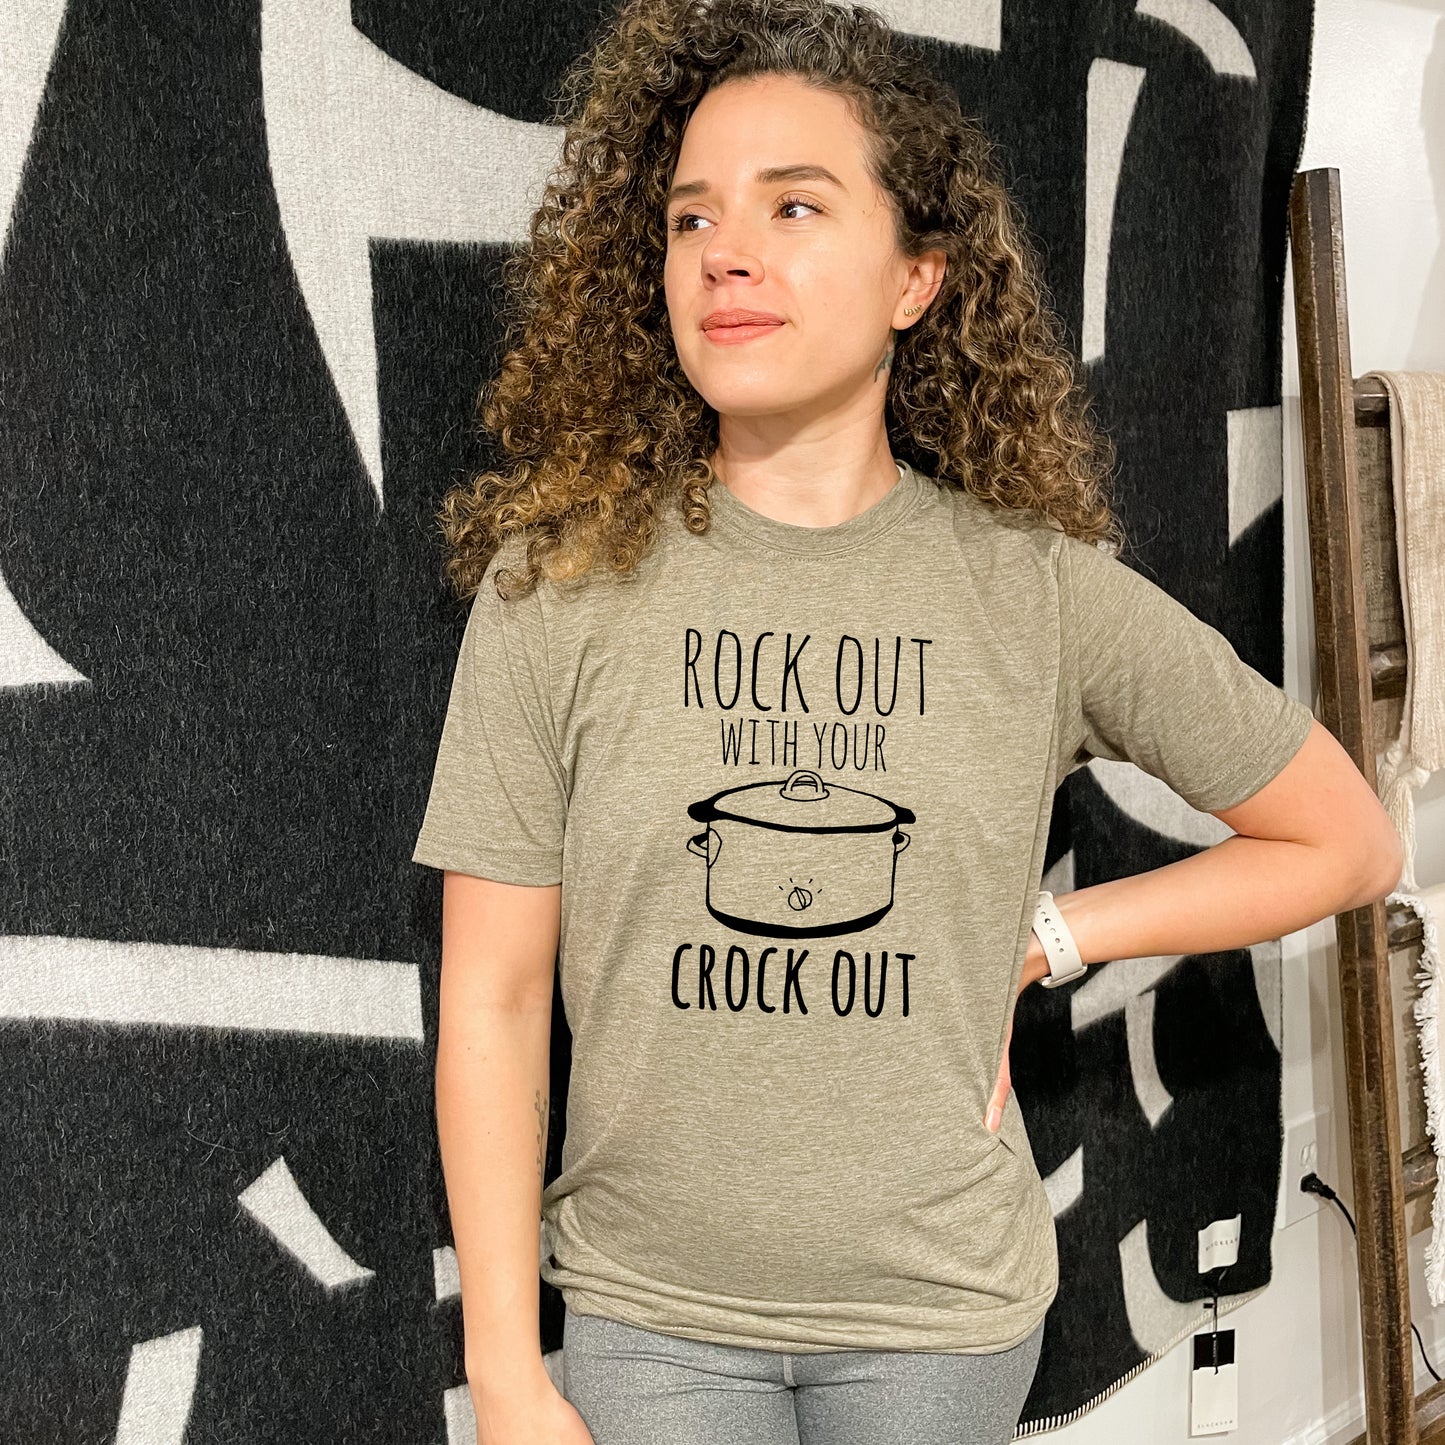 Rock Out With Your Crock Out - Men's / Unisex Tee - Stonewash Blue or Sage